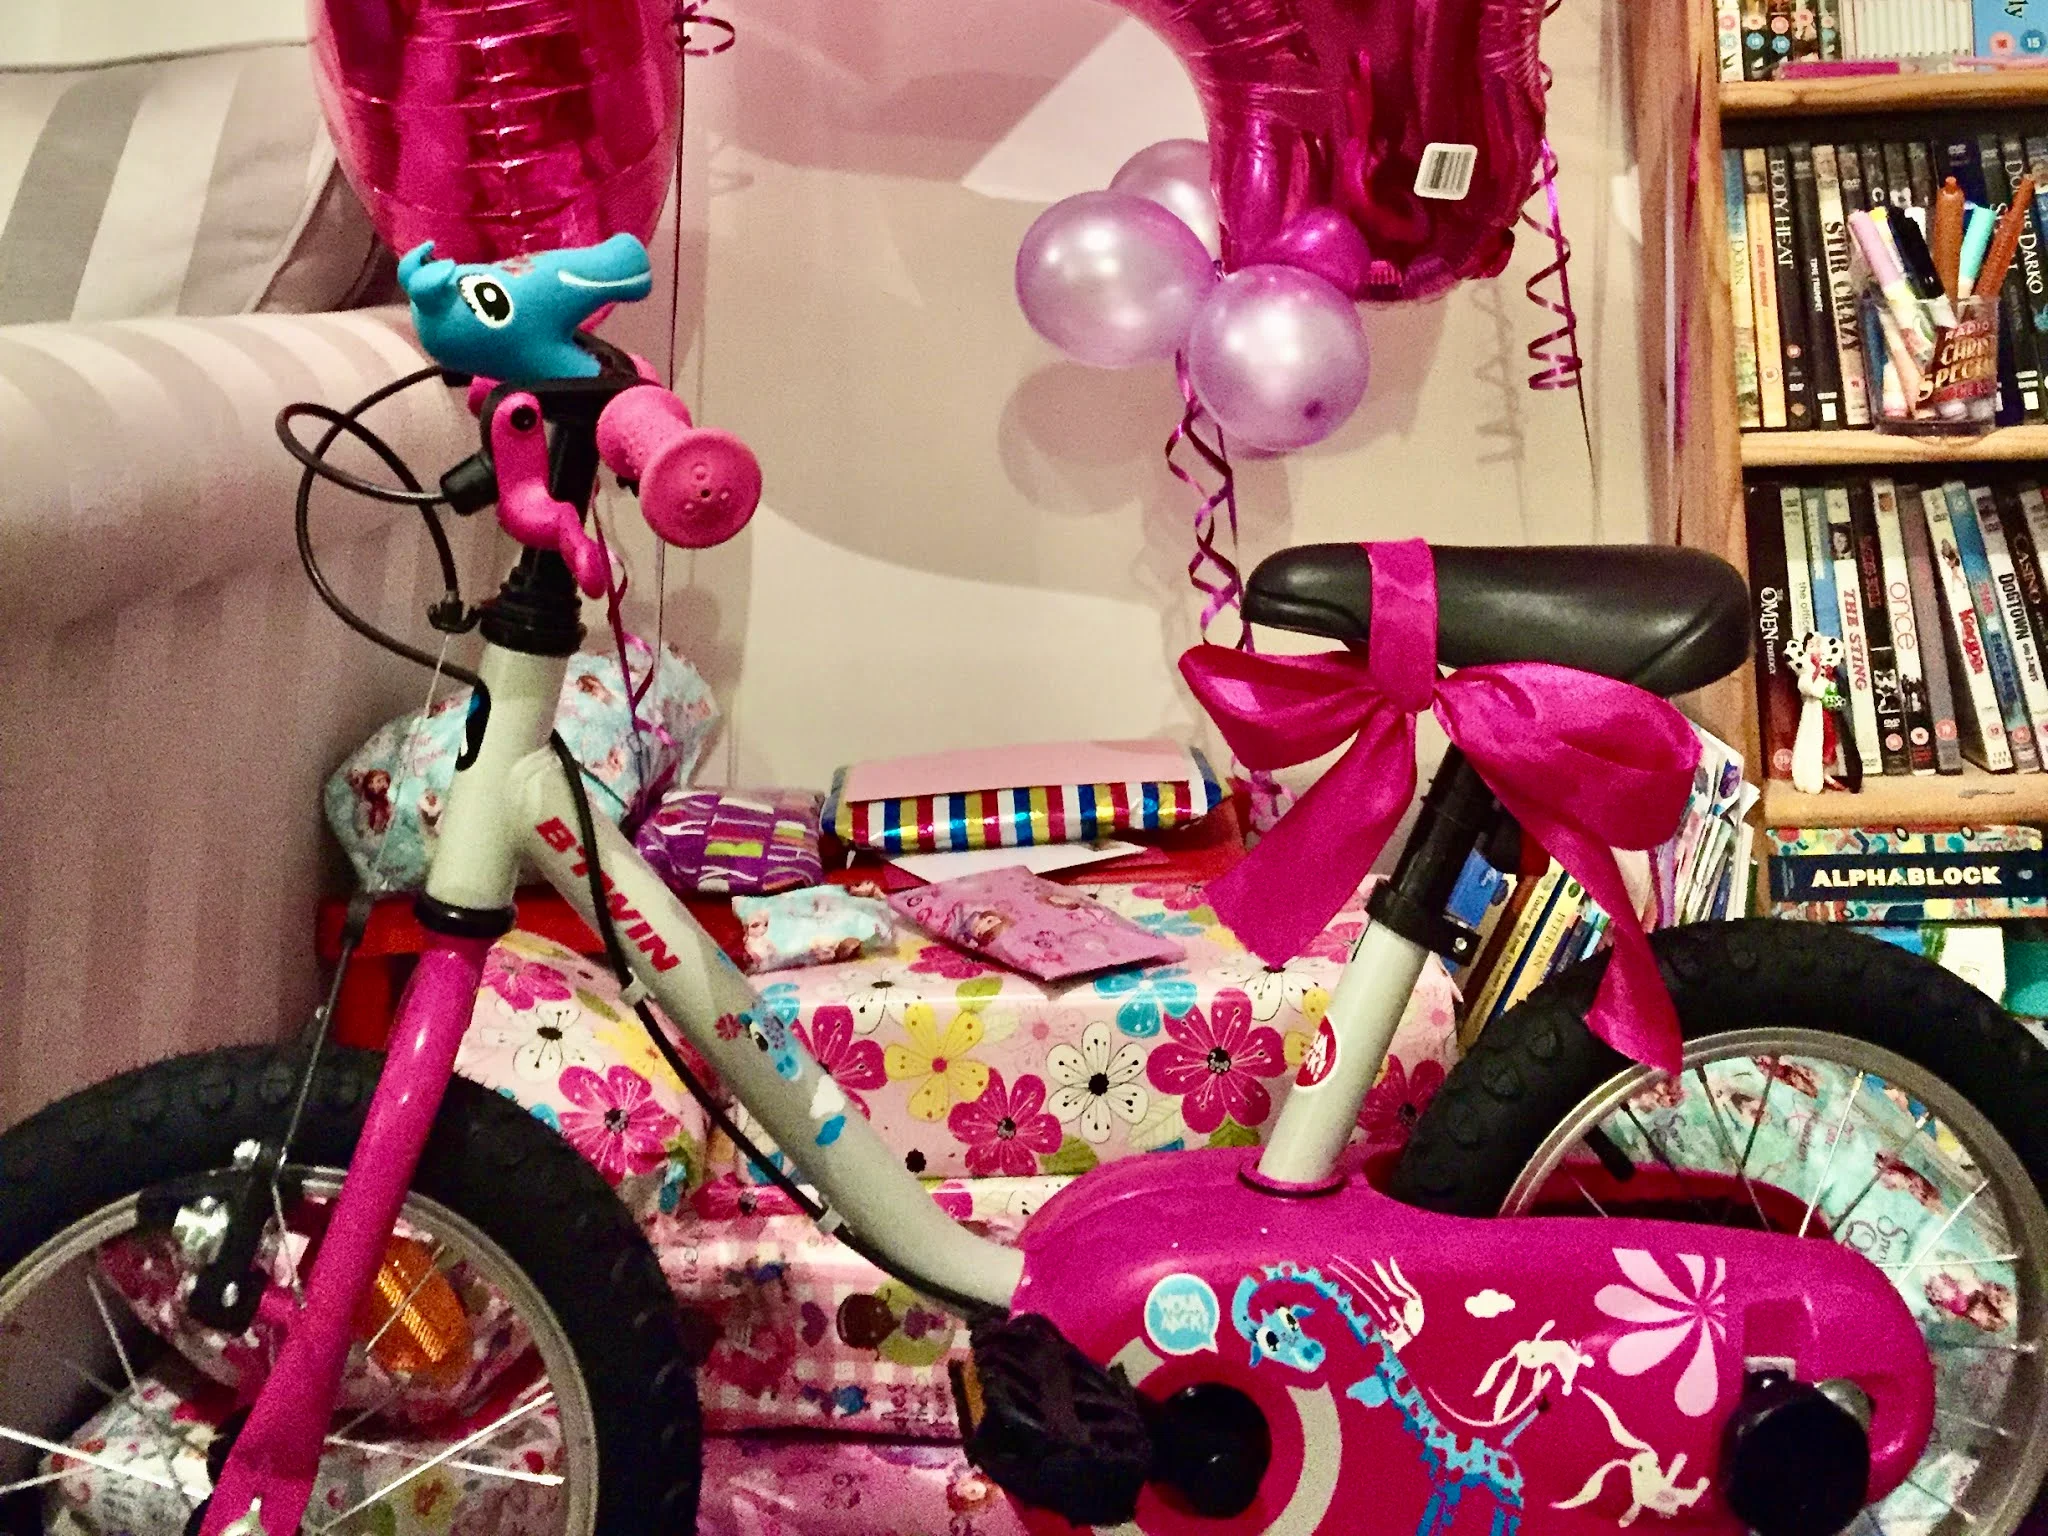 a pile of presents and balloons for a 4th birthday with a bike at the front